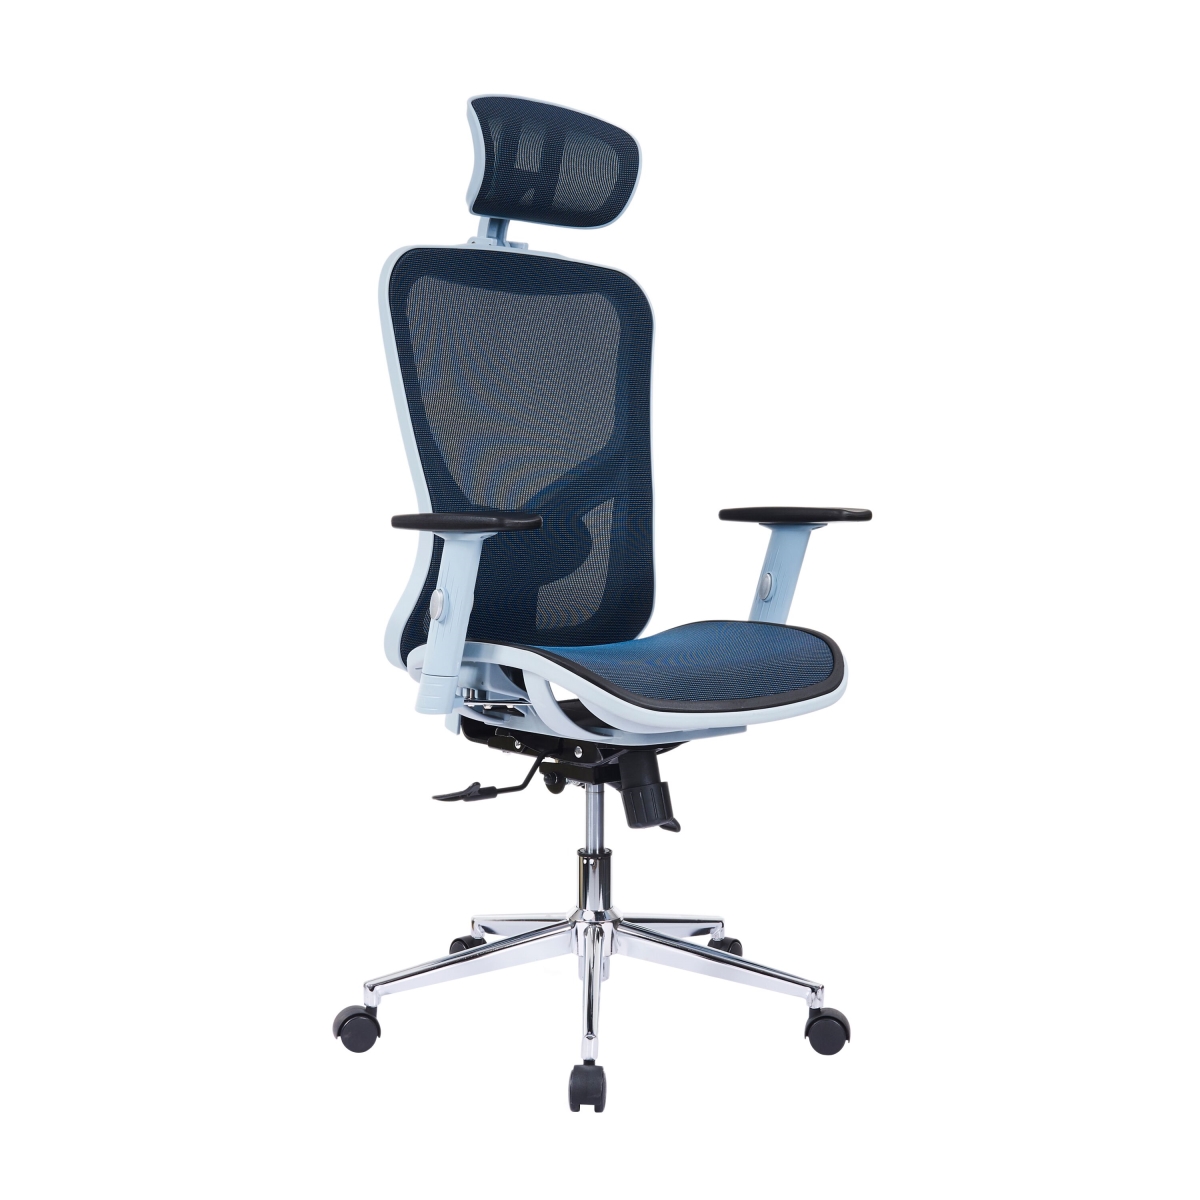 Rta-1008-bl High Back Executive Mesh Office Chair With Arms, Headrest & Lumbar Support, Blue - 25.5 X 24.5 X 40.5 To 51.5 In.